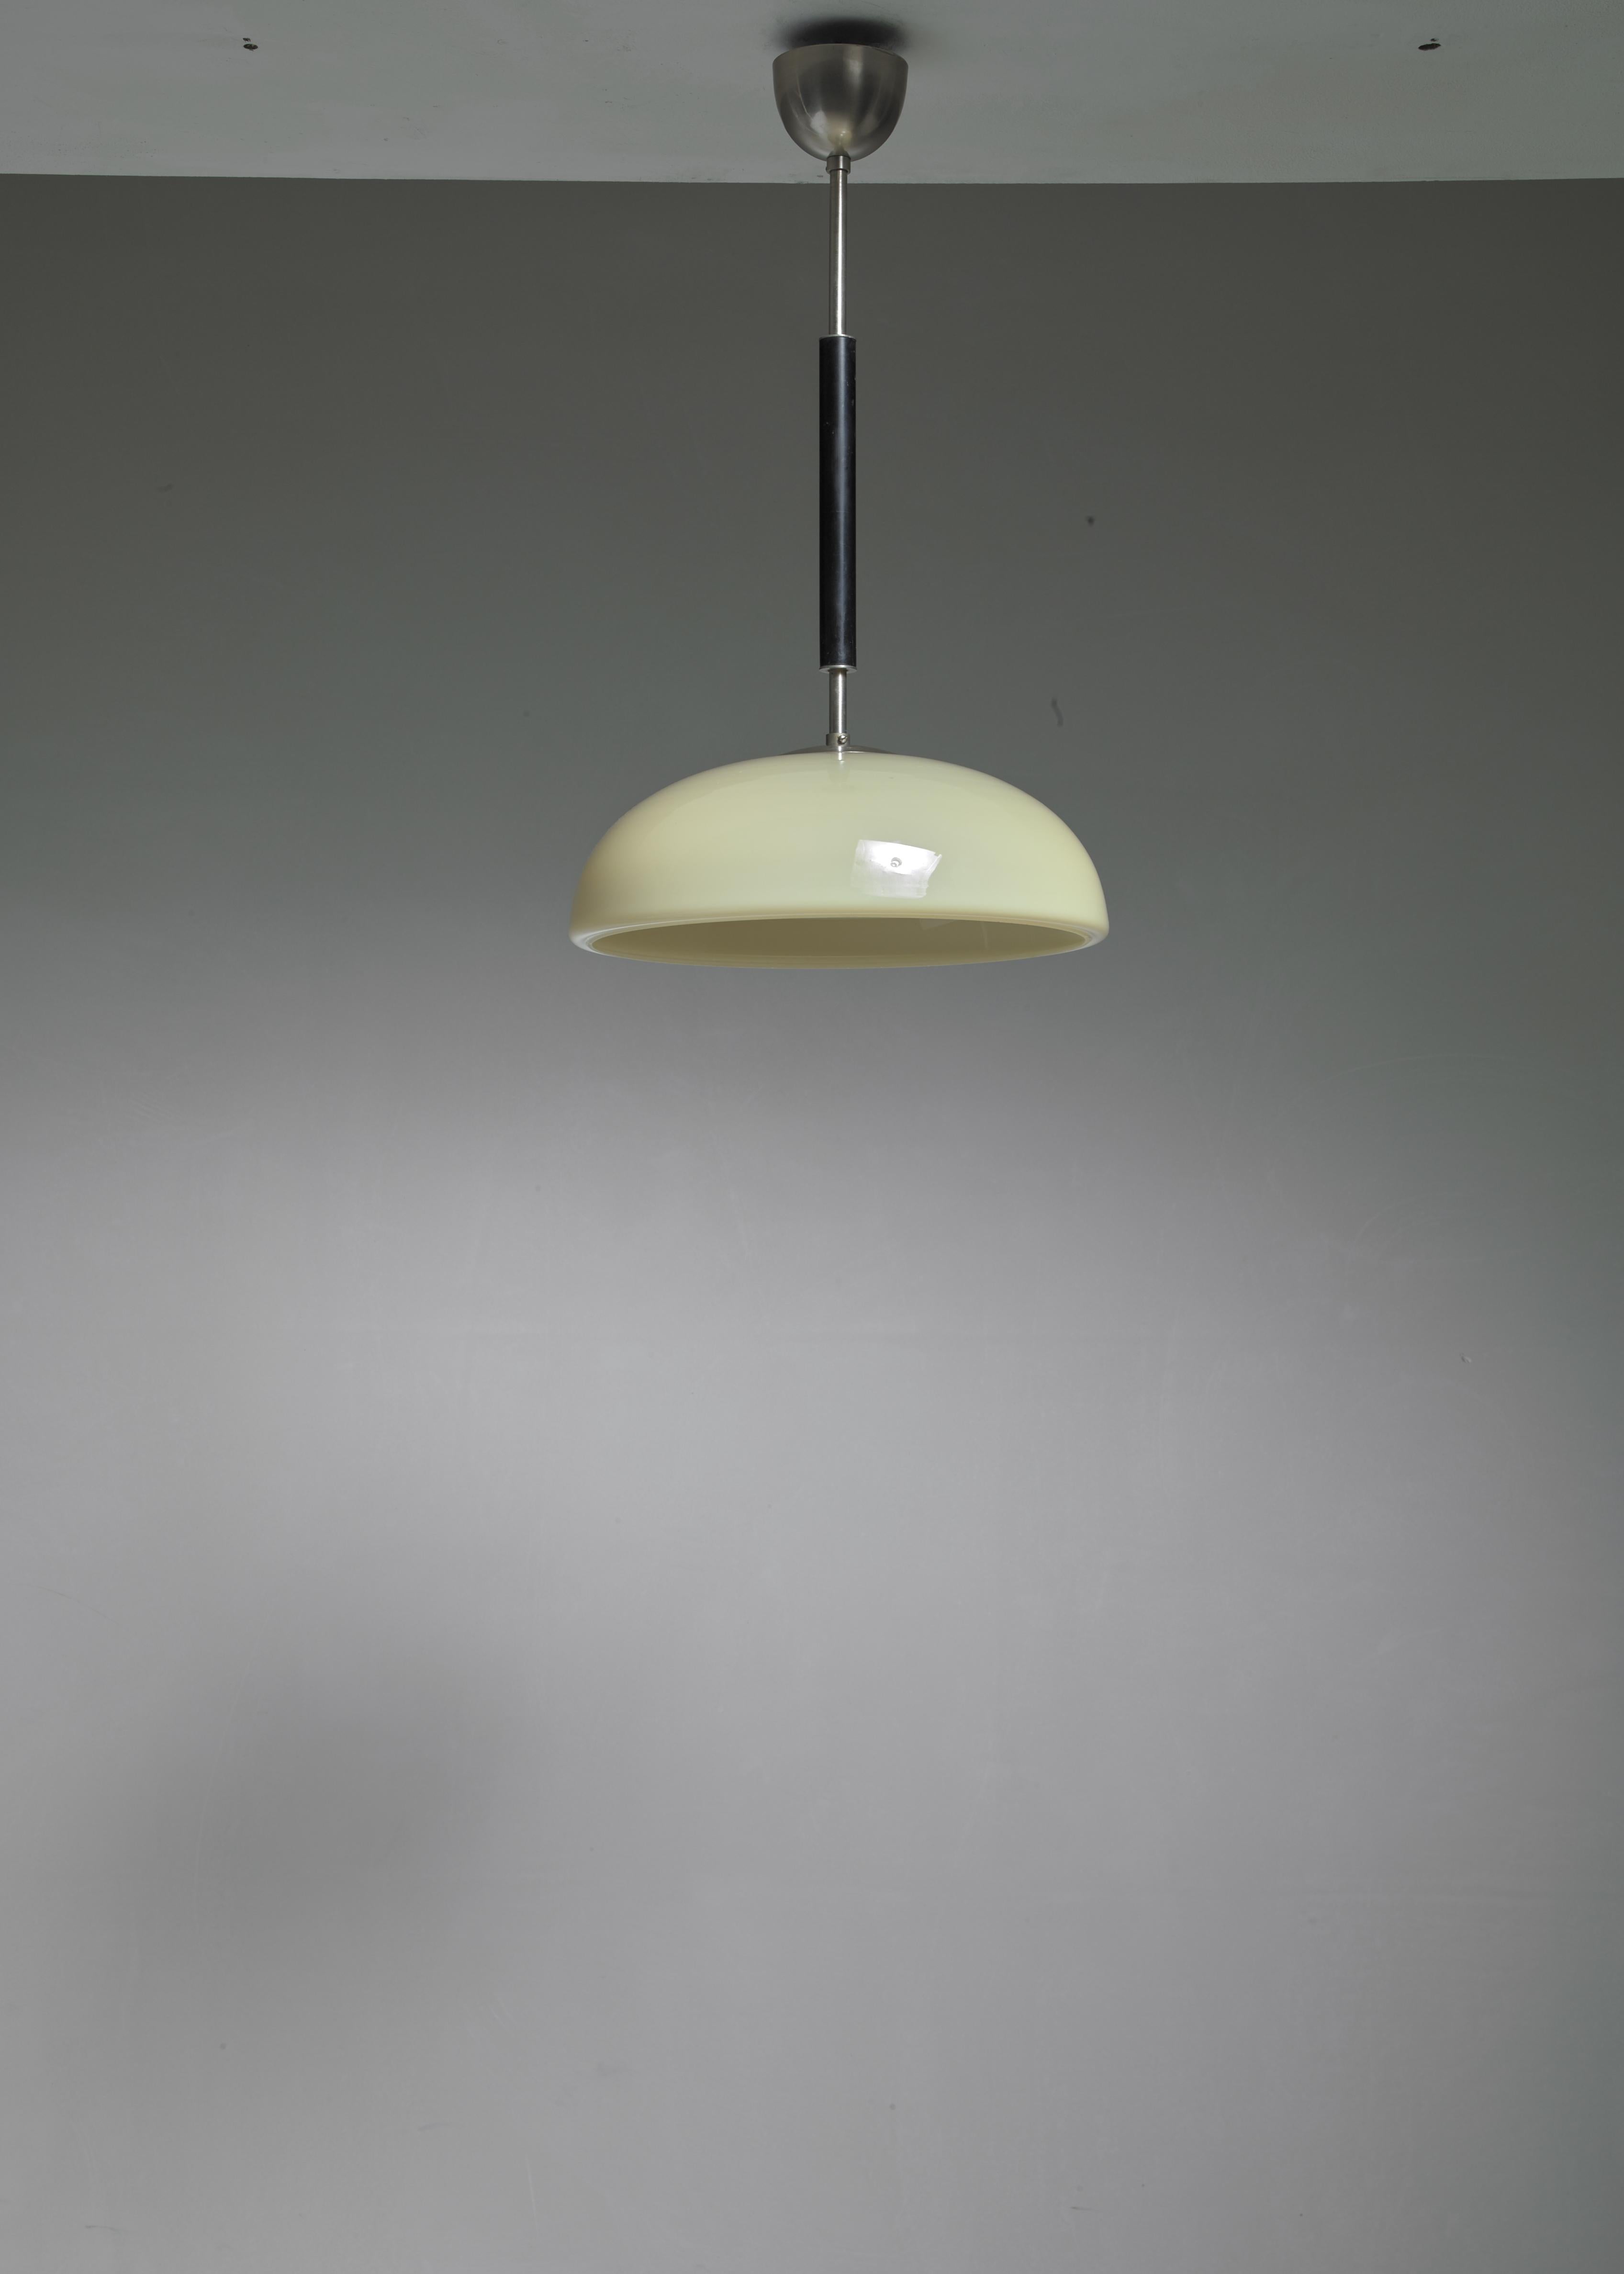 A 1920s Swedish modernist pendant made of a yellow glass shade with an opaline glass diffuser and a nickel with bakelite stem.